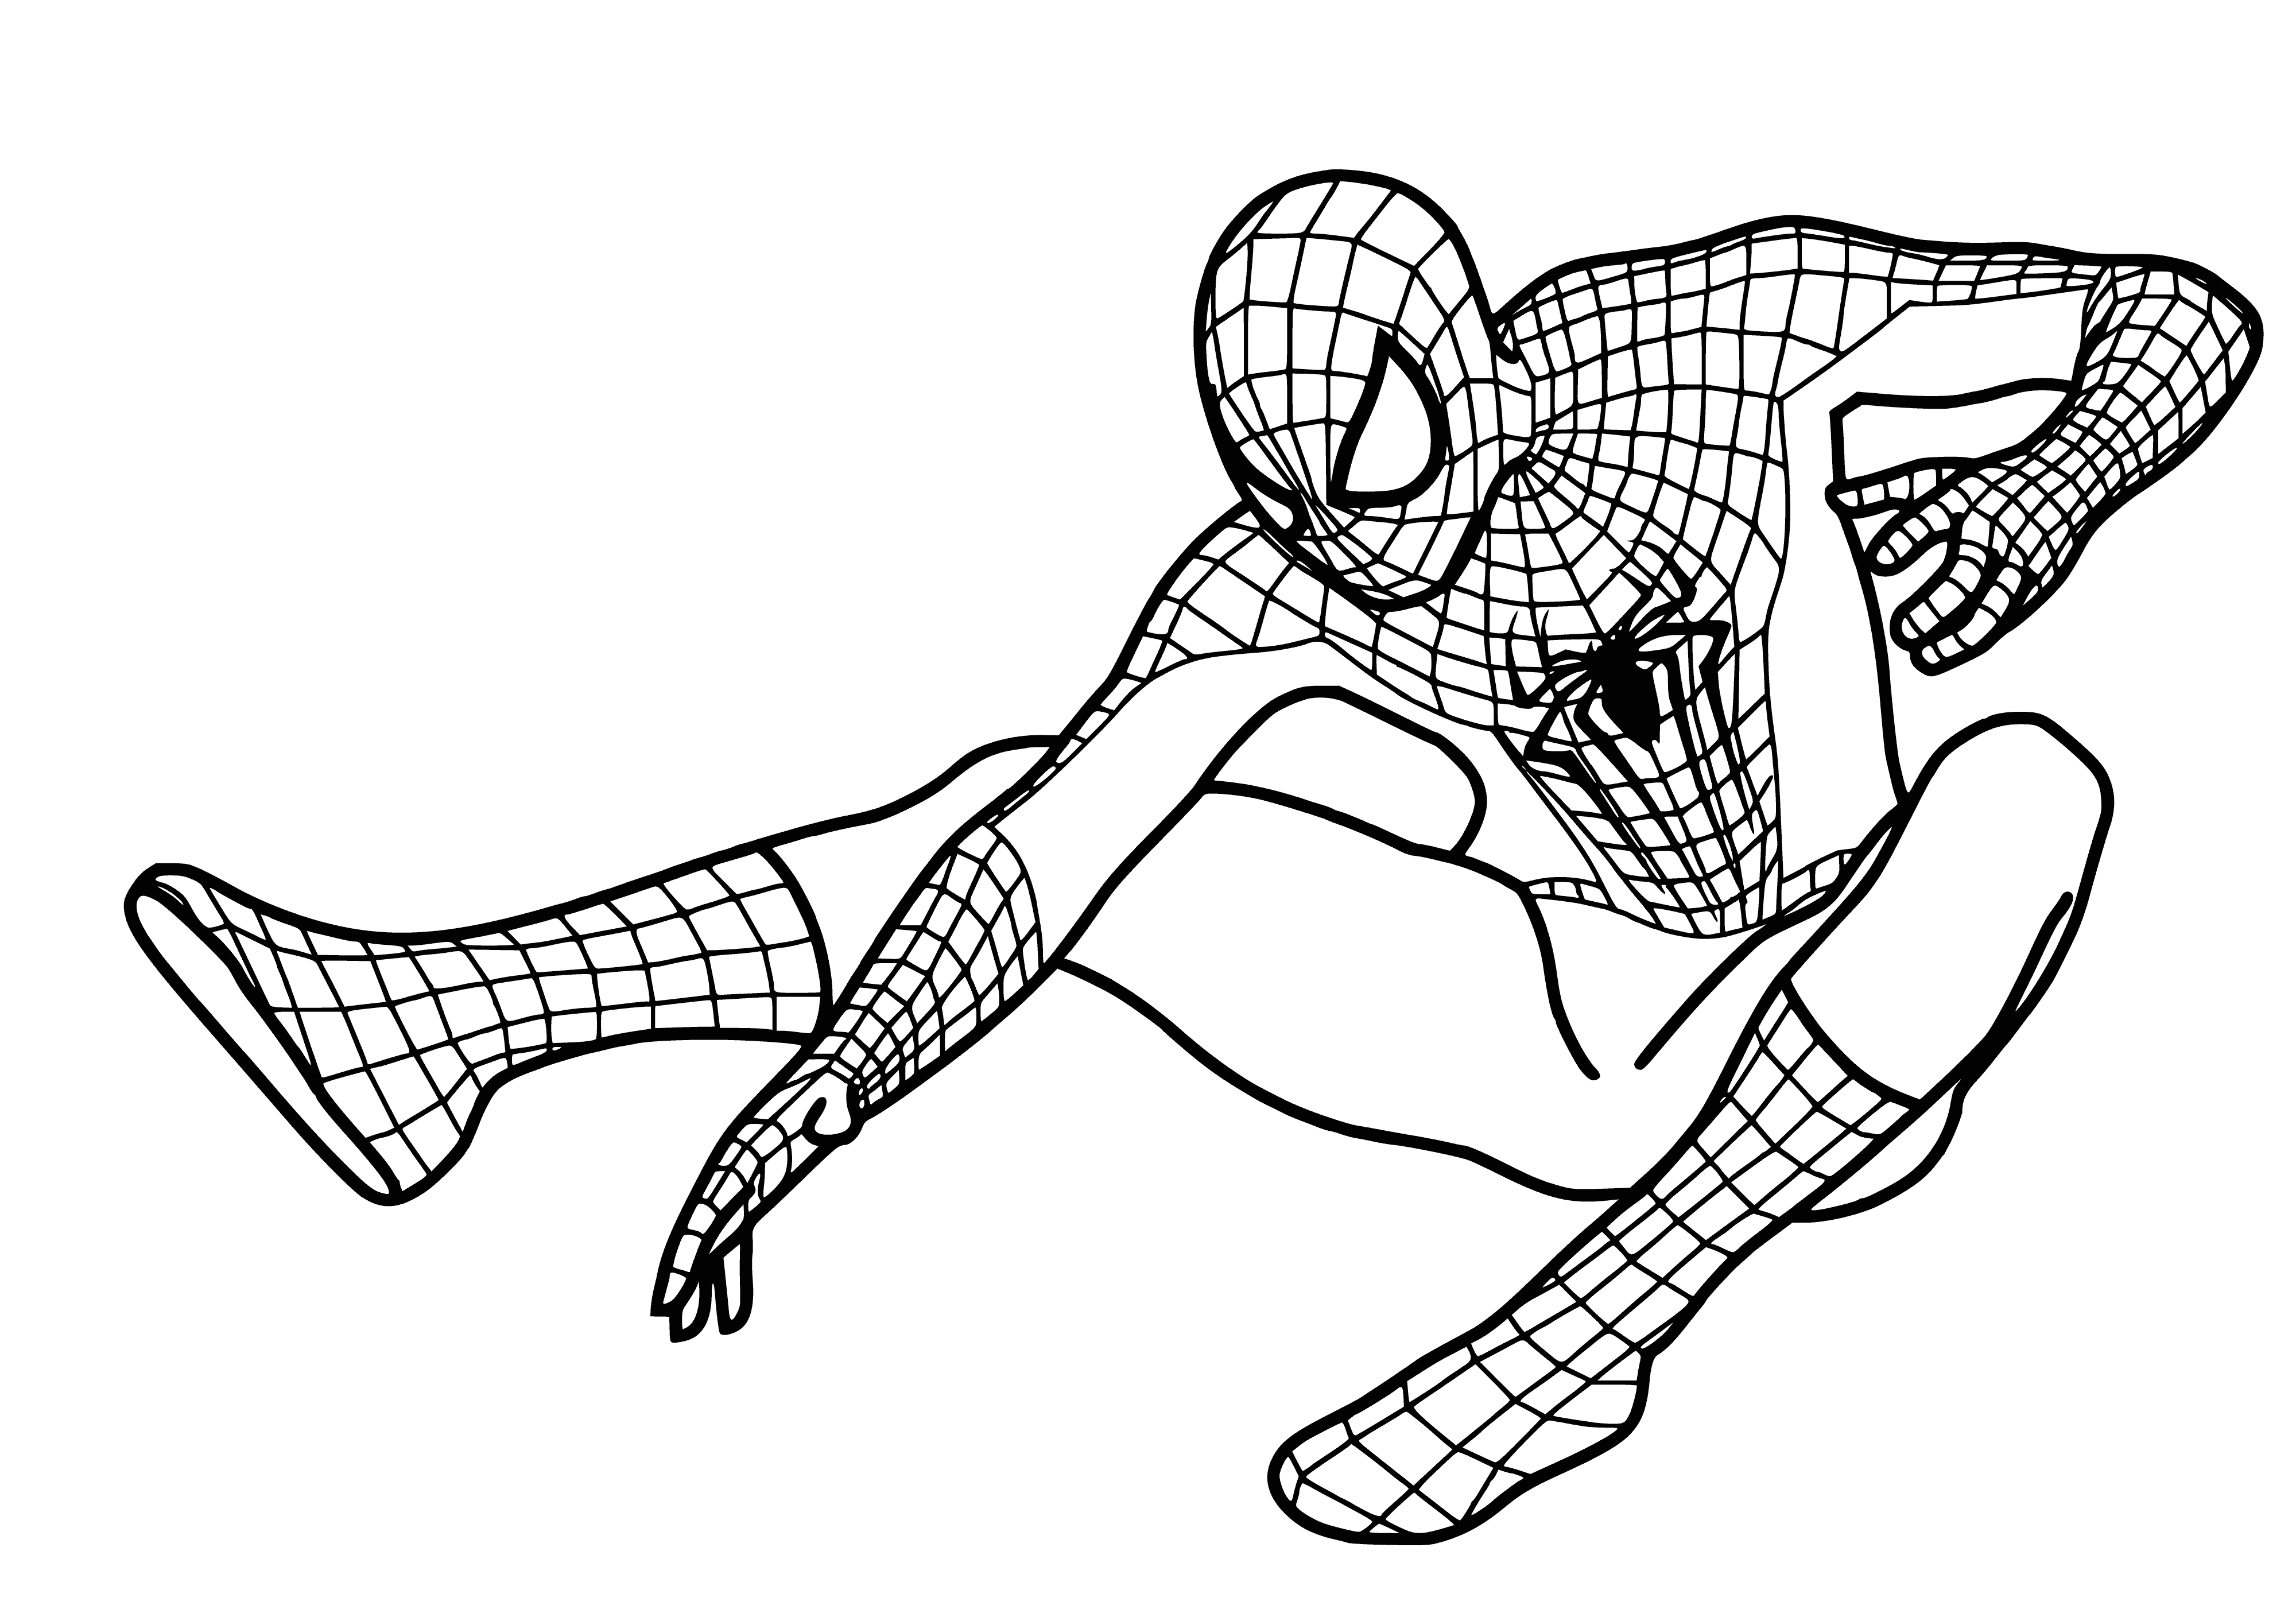 coloring page: Spider-Man climbs building in red and blue suit covered in webbing; wearing black mask with white eyes and holding black and white spider.